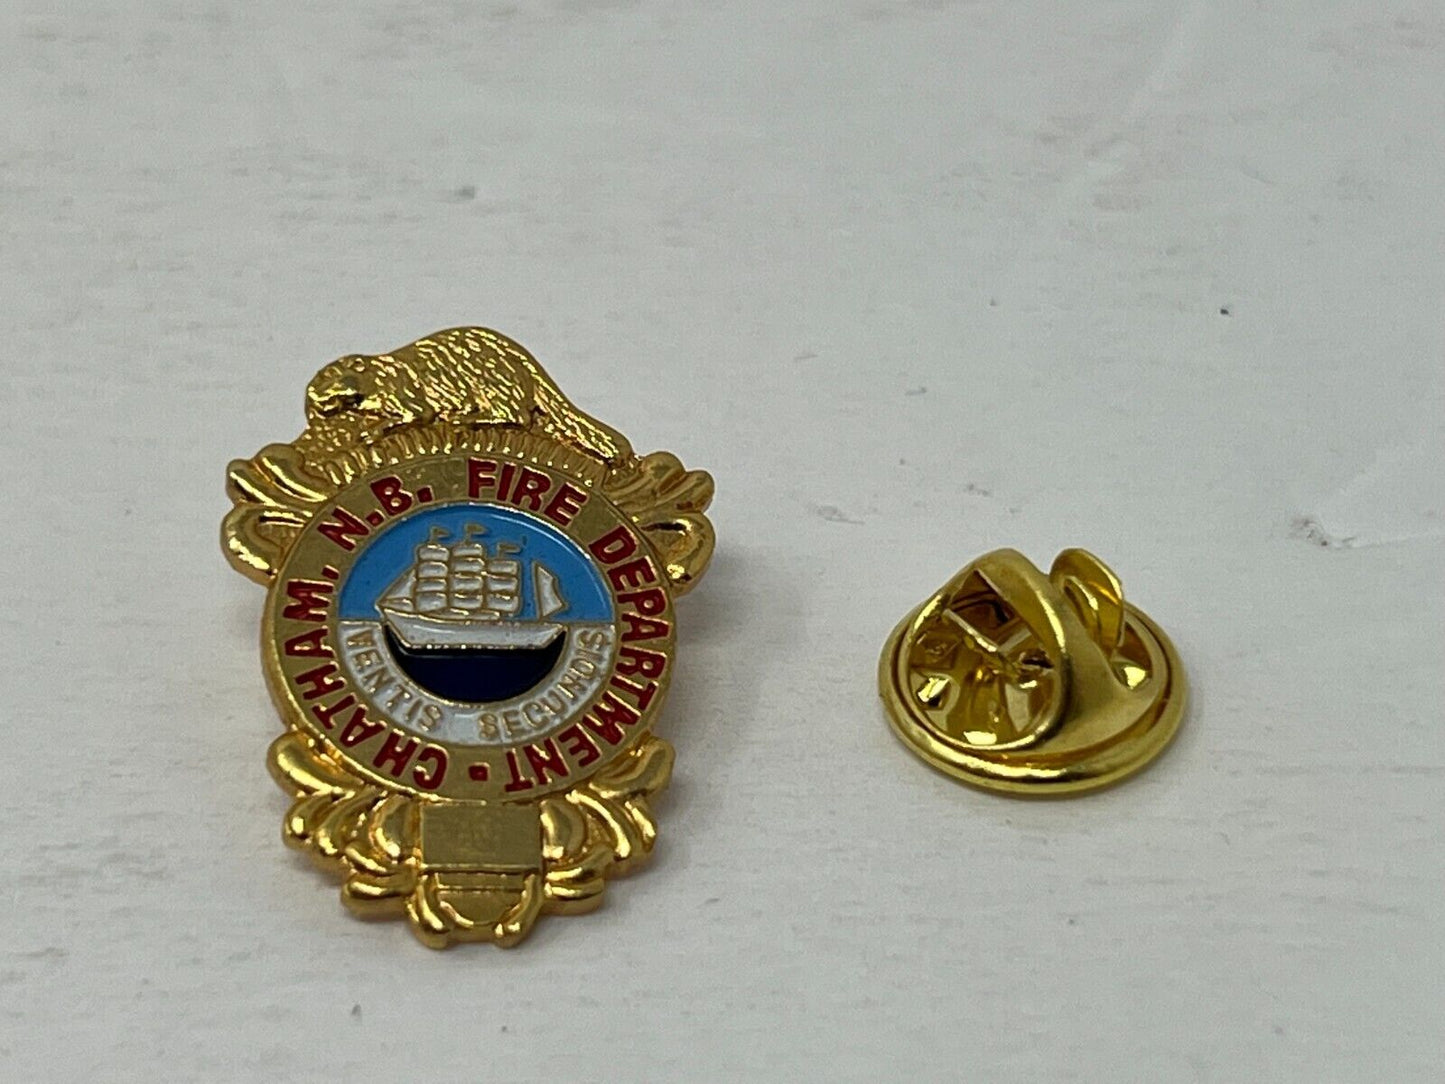 Chatham New Brunswick Fire Department Emergency Services Lapel Pin